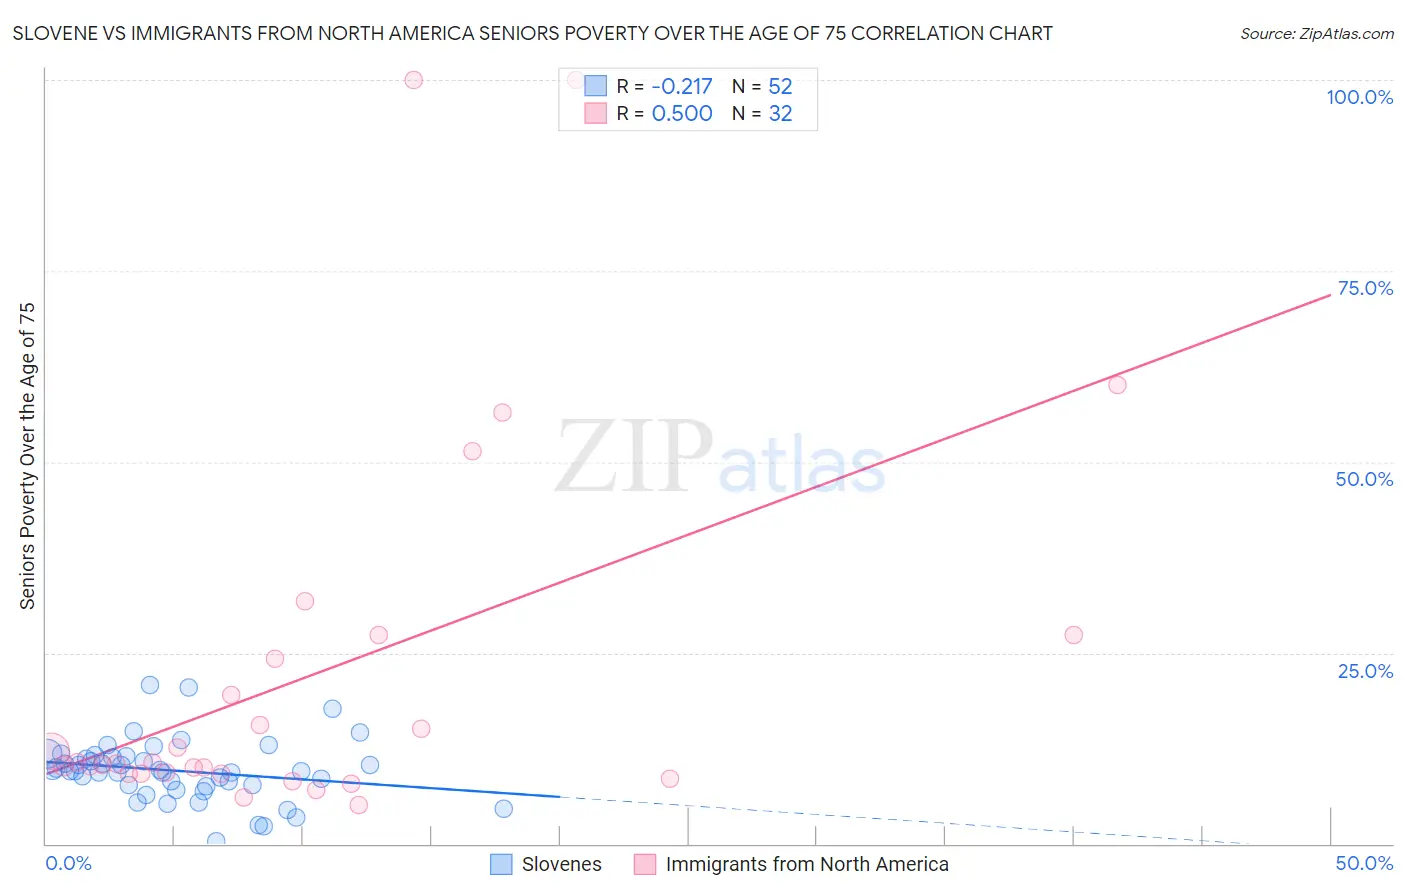 Slovene vs Immigrants from North America Seniors Poverty Over the Age of 75